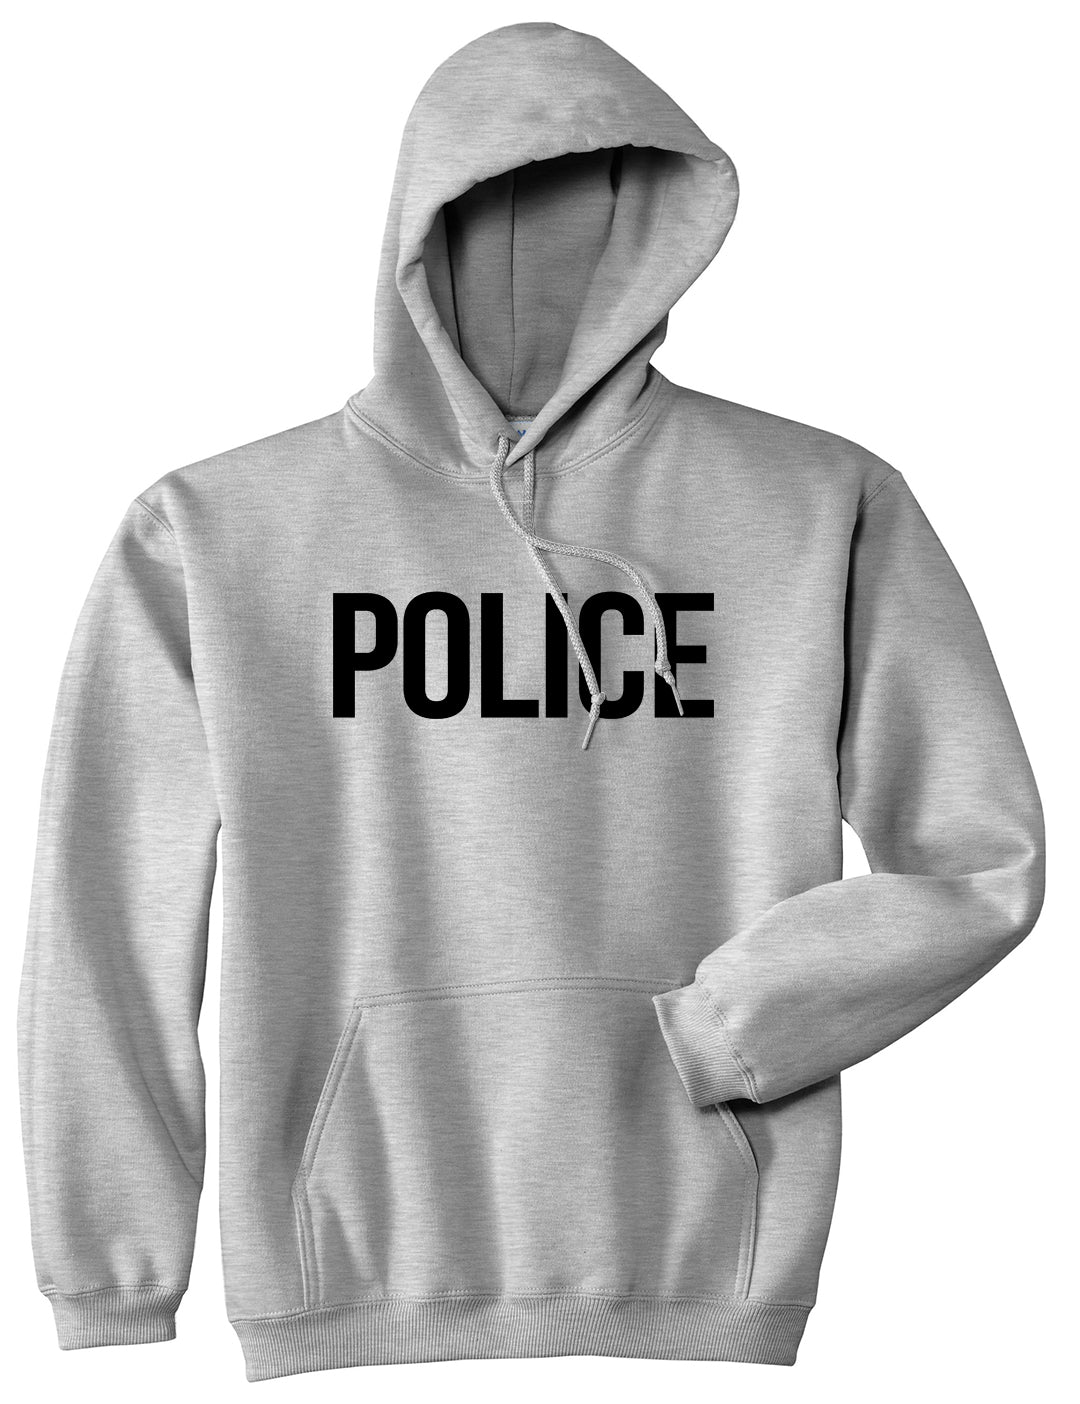 Police Uniform Cop Costume Mens Pullover Hoodie Grey by Kings Of NY